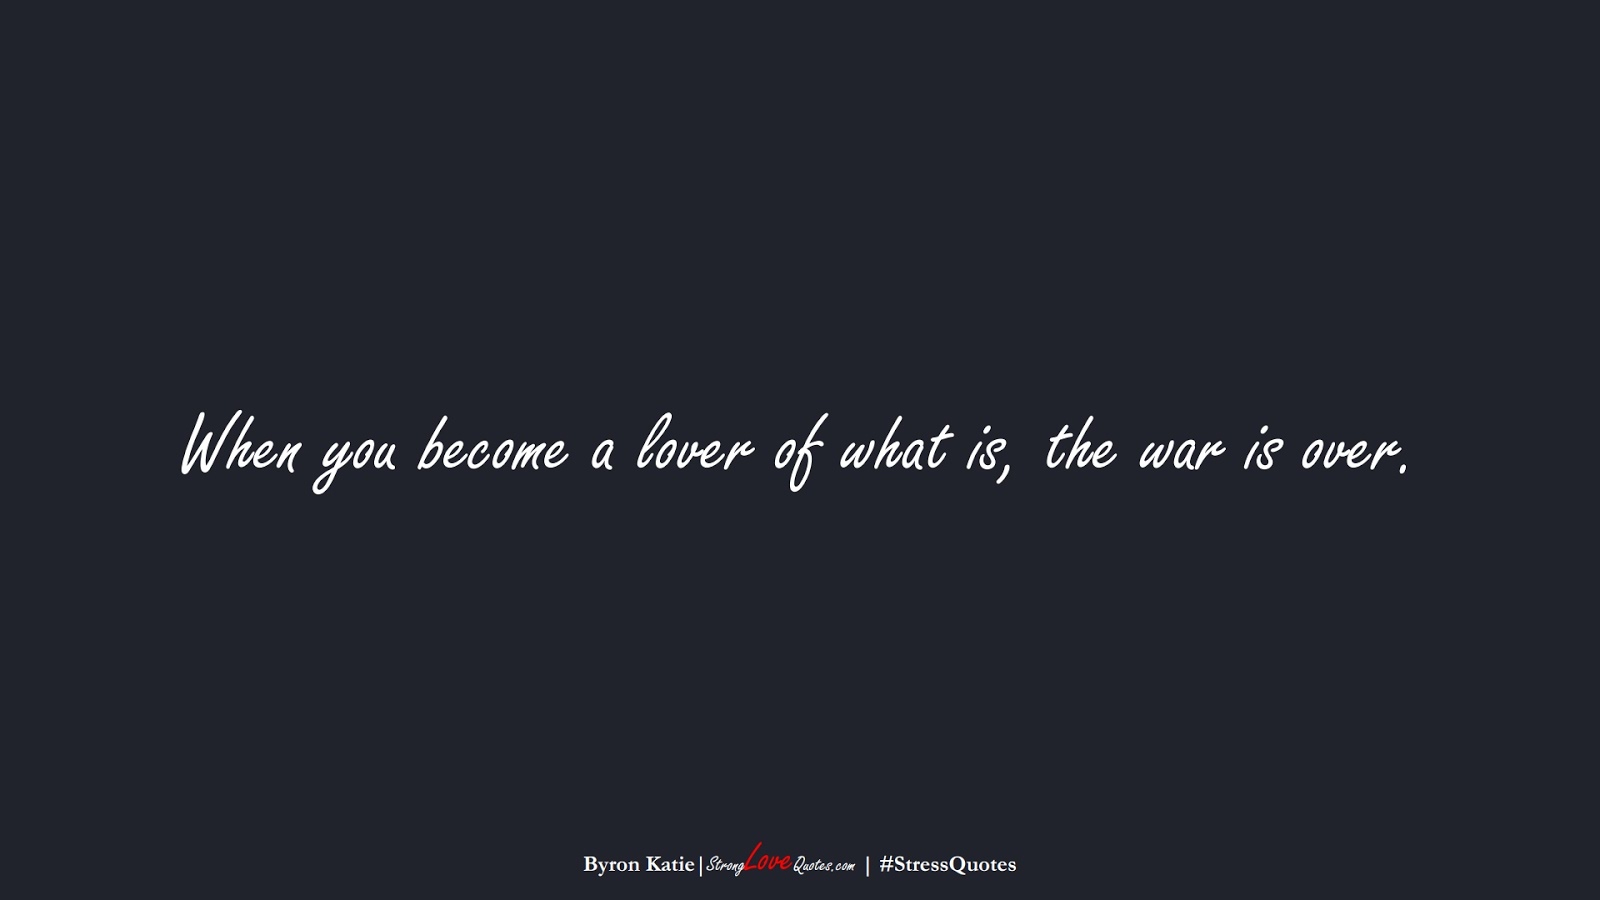 When you become a lover of what is, the war is over. (Byron Katie);  #StressQuotes